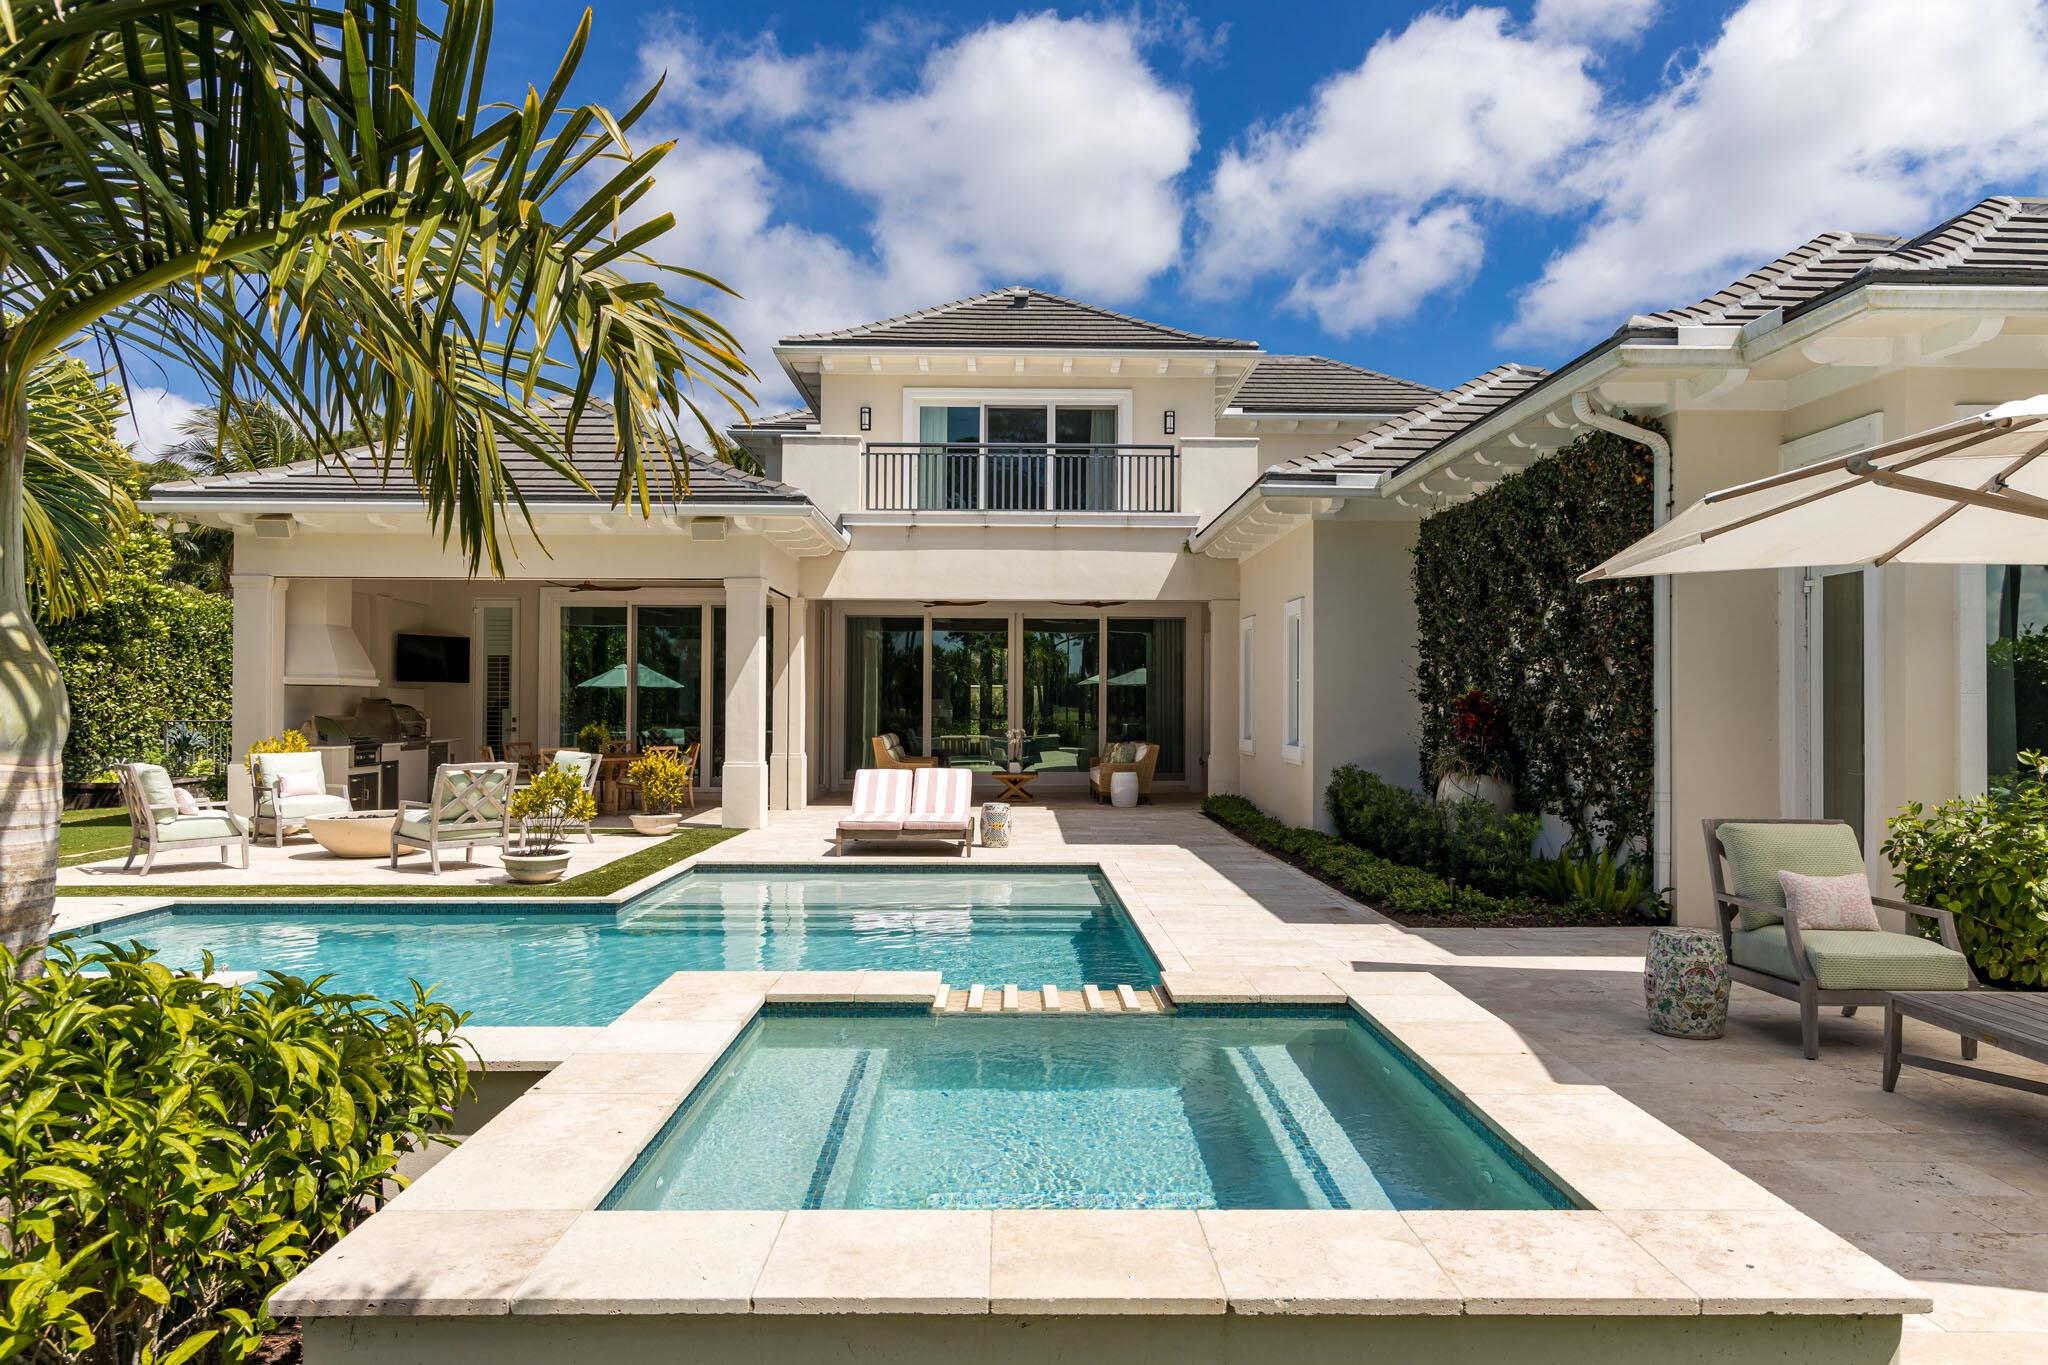 Spectacular 2 story British West Indies style estate in Old Palm Golf Club. Situated on a 1/2-acre lot with stunning views of the golf course. Located on Plantation Way, where homes rarely come on the market, this home was completed in 2017 and redesigned in 2022 with high-end interior design by Andrew Howard. Spread over 7,626 total square feet with high ceilings throughout, the home offers 4 bedrooms, 5 bathrooms, 2 powder rooms, an expansive great room, dining room with built-in wine fridge, family room, office/library, elevator and fabulous eat-in kitchen all in a free-flowing open concept design. The 3 car garage with additional golf cart garage entrance provides ample space for all of your storage needs. The gourmet kitchen features double 10ft islands, Cristallo Quartz countertops, and Wolf SubZero and Bosch appliances. The serene and peaceful primary suite is exquisite! It features an expansive bedroom with 12ft ceilings and sitting area that opens to the pool and spa. His and Her luxury bathrooms and closets are a highlight of the home!
This is an entertainer's dream - spacious covered loggia with new summer kitchen, pizza oven, Lynx Grill, refrigerator drawers, pool, spa, large pool deck, gas fire pit and exquisite sunset views from the expansive pool deck. Some of the state-of-the-art features include a Savant home automation and lighting control system, whole house water filtration system and new pool equipment.
The 650-acre Old Palm Golf Club, known for its Raymond Floyd designed course, has been recently updated with a new clubhouse, Bistro restaurant and 20,000 SF lifestyle center which includes spa, fitness facility, lap pool, 3-hole practice studio, kid's club and caf+¬. In addition, there are 1 BR guest casitas available and beach club membership at the Hilton on Singer Island. Experience luxurious living that Old Palm provides.